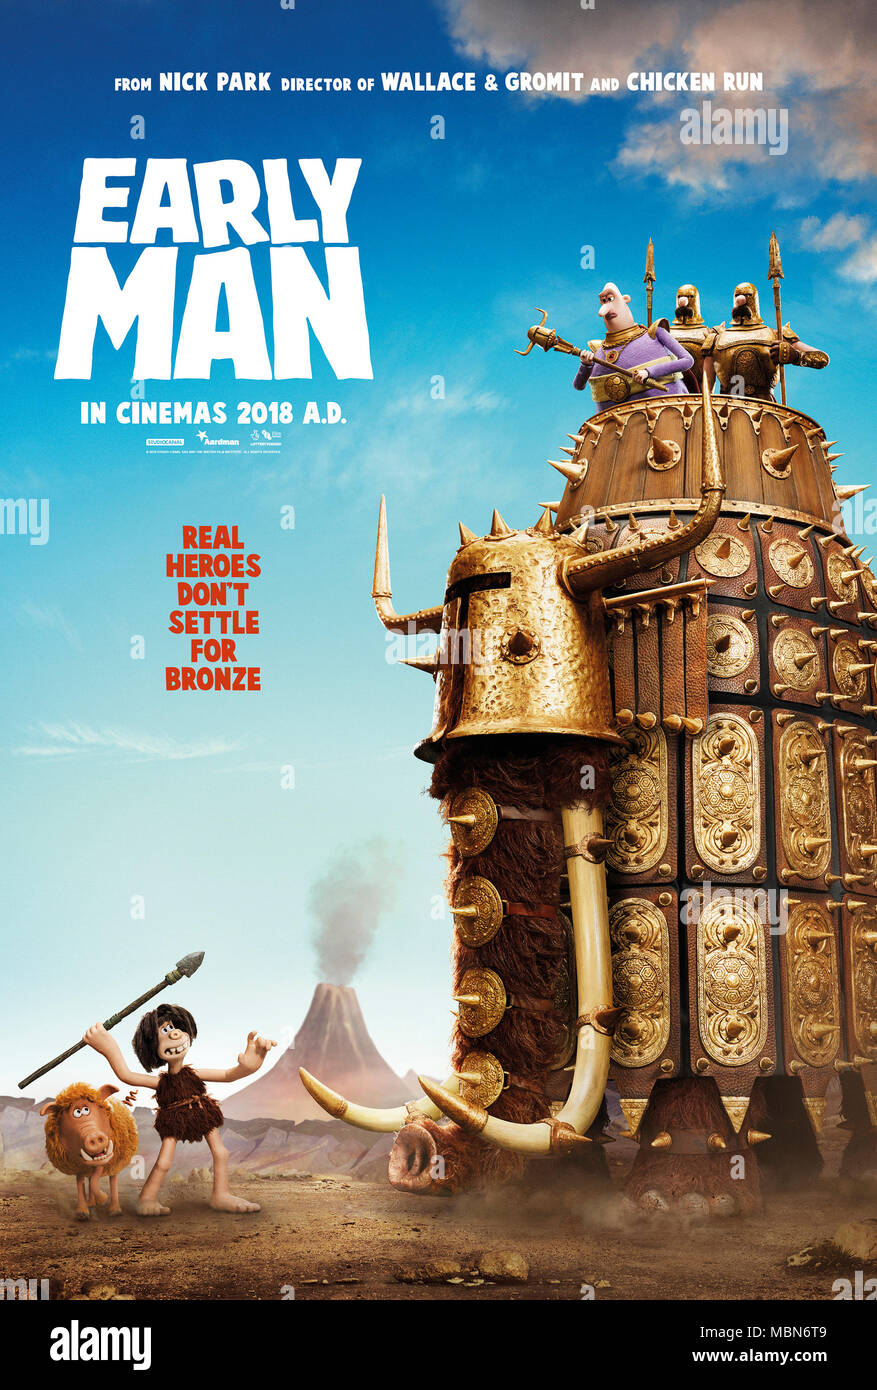 RELEASE DATE: February 16, 2018 TITLE: Early Man STUDIO: Lionsgate DIRECTOR: Nick Park PLOT: Set at the dawn of time, when prehistoric creatures and woolly mammoths roamed the earth, Early Man tells the story of Dug, along with sidekick Hognob as they unite his tribe against a mighty enemy Lord Nooth and his Bronze Age City to save their home. STARRING: Tom Hiddleston, Eddie Redmayne, Maisie Williams. (Credit Image: © Lionsgate/Entertainment Pictures) Stock Photo